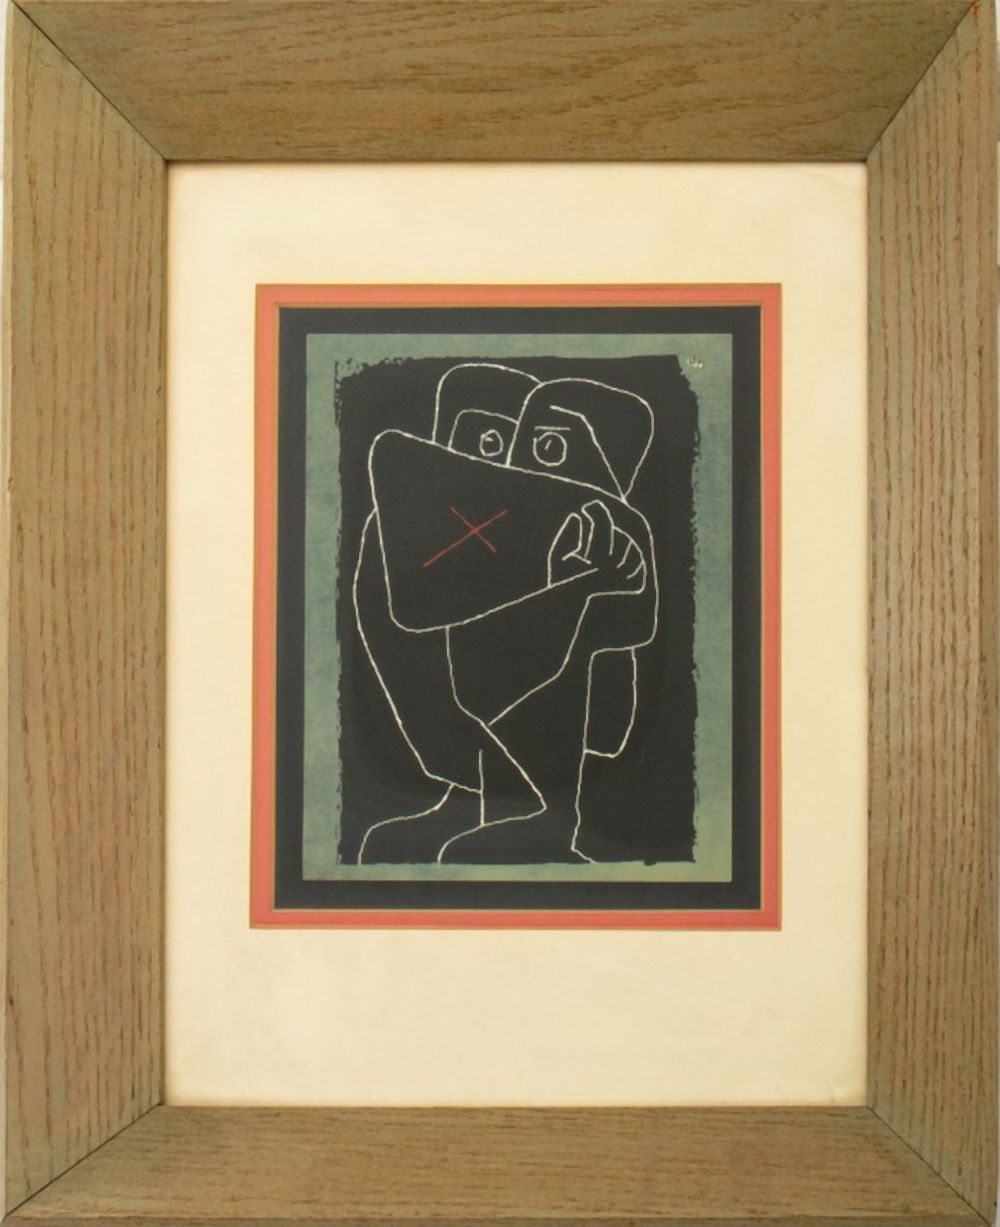 PAUL KLEE "THE EMBRACE" SCREEN